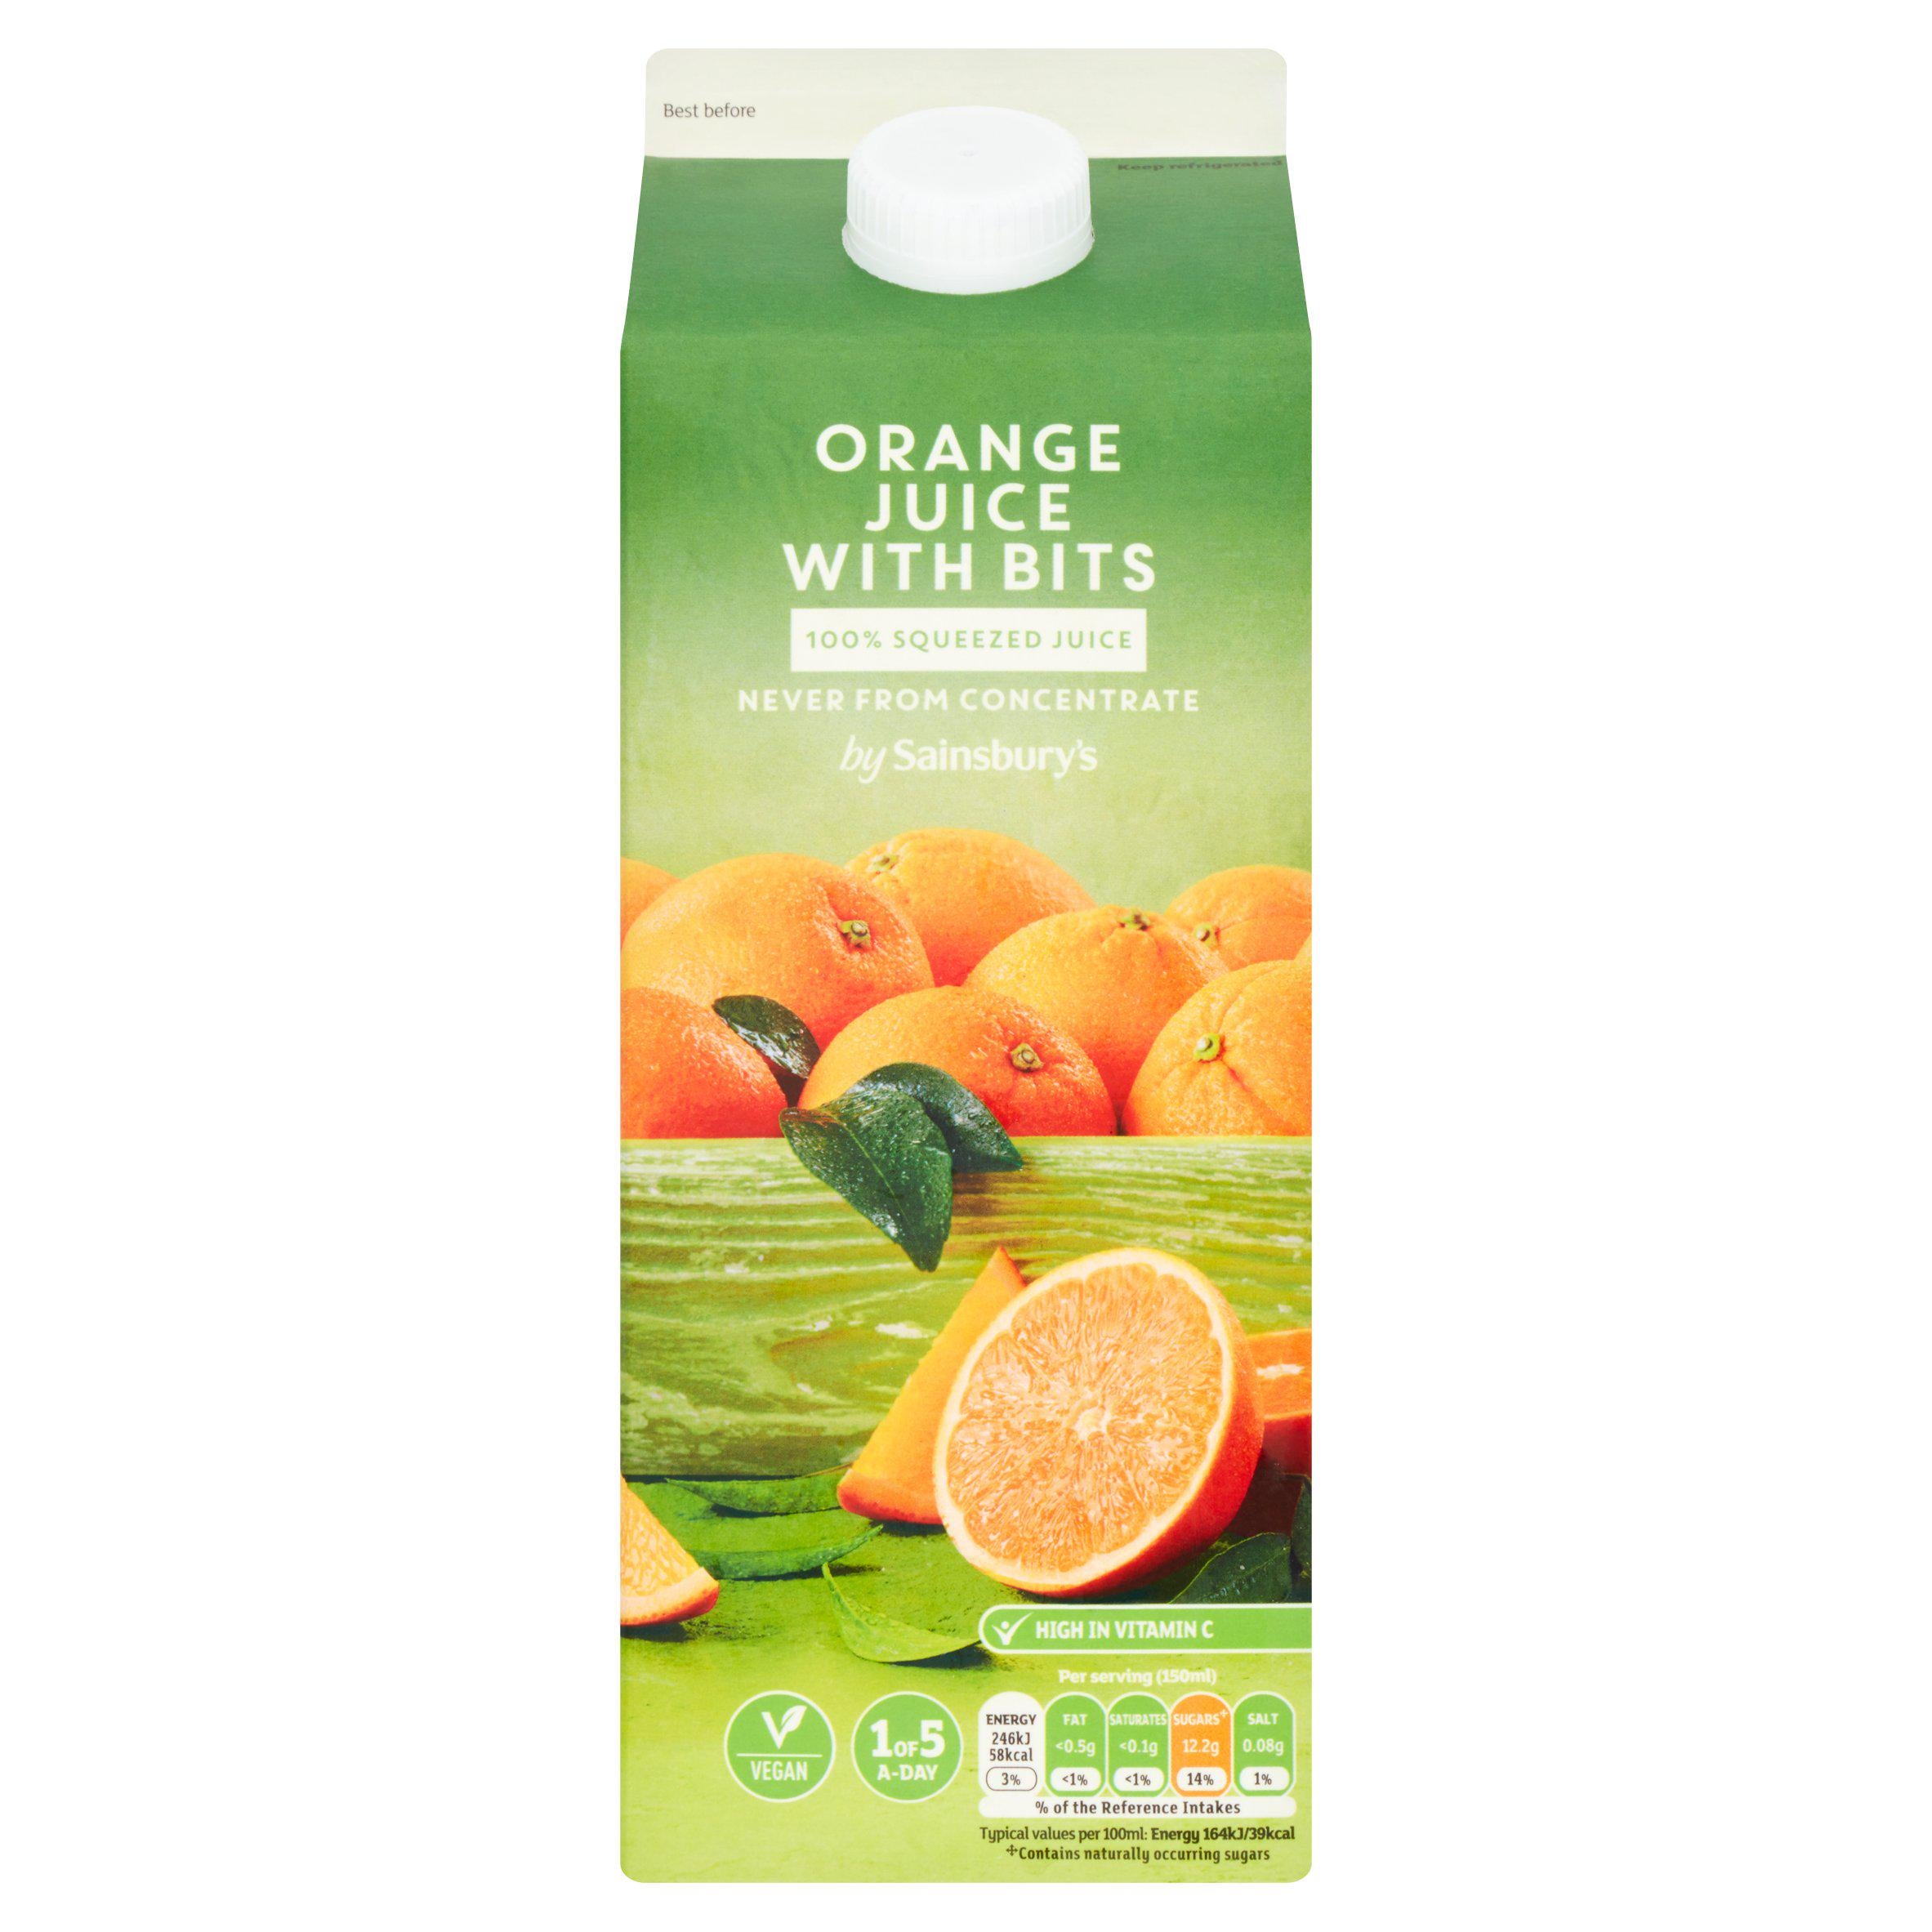 Sainsbury's 100% Pure Squeezed Orange Juice with Bits, Not From Concentrate 1.75L All chilled juice Sainsburys   